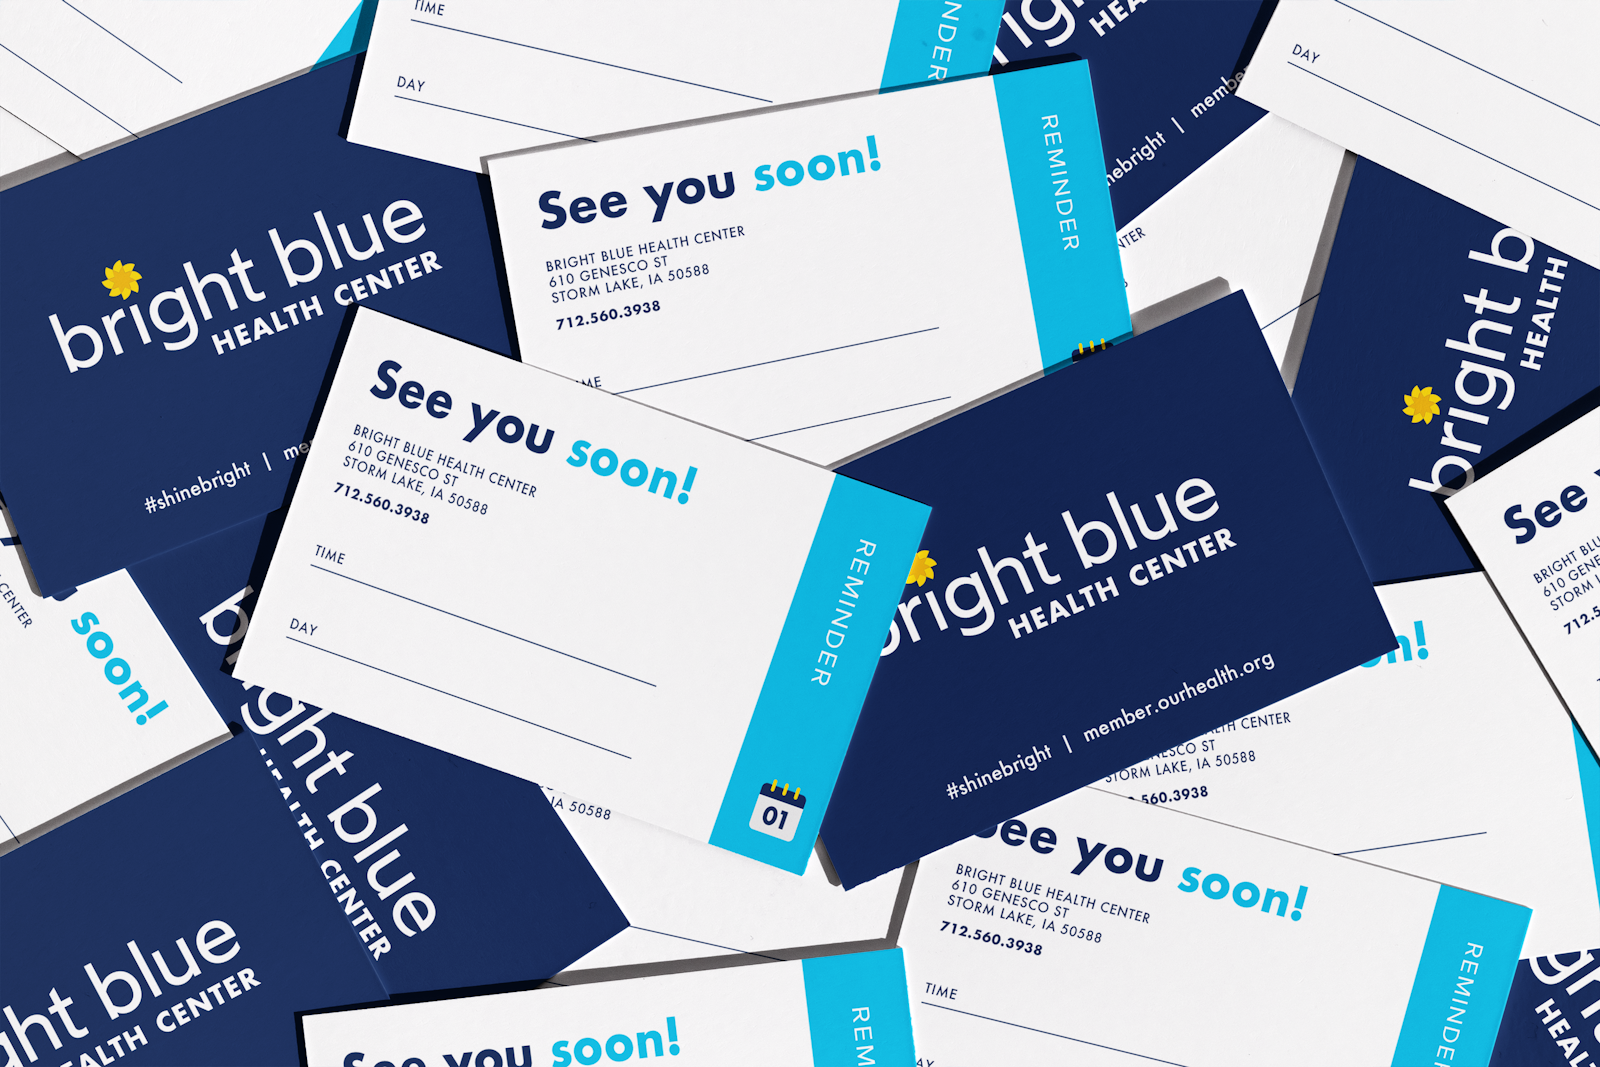 The Bright Blue brand design appointment card in a pile of cards.